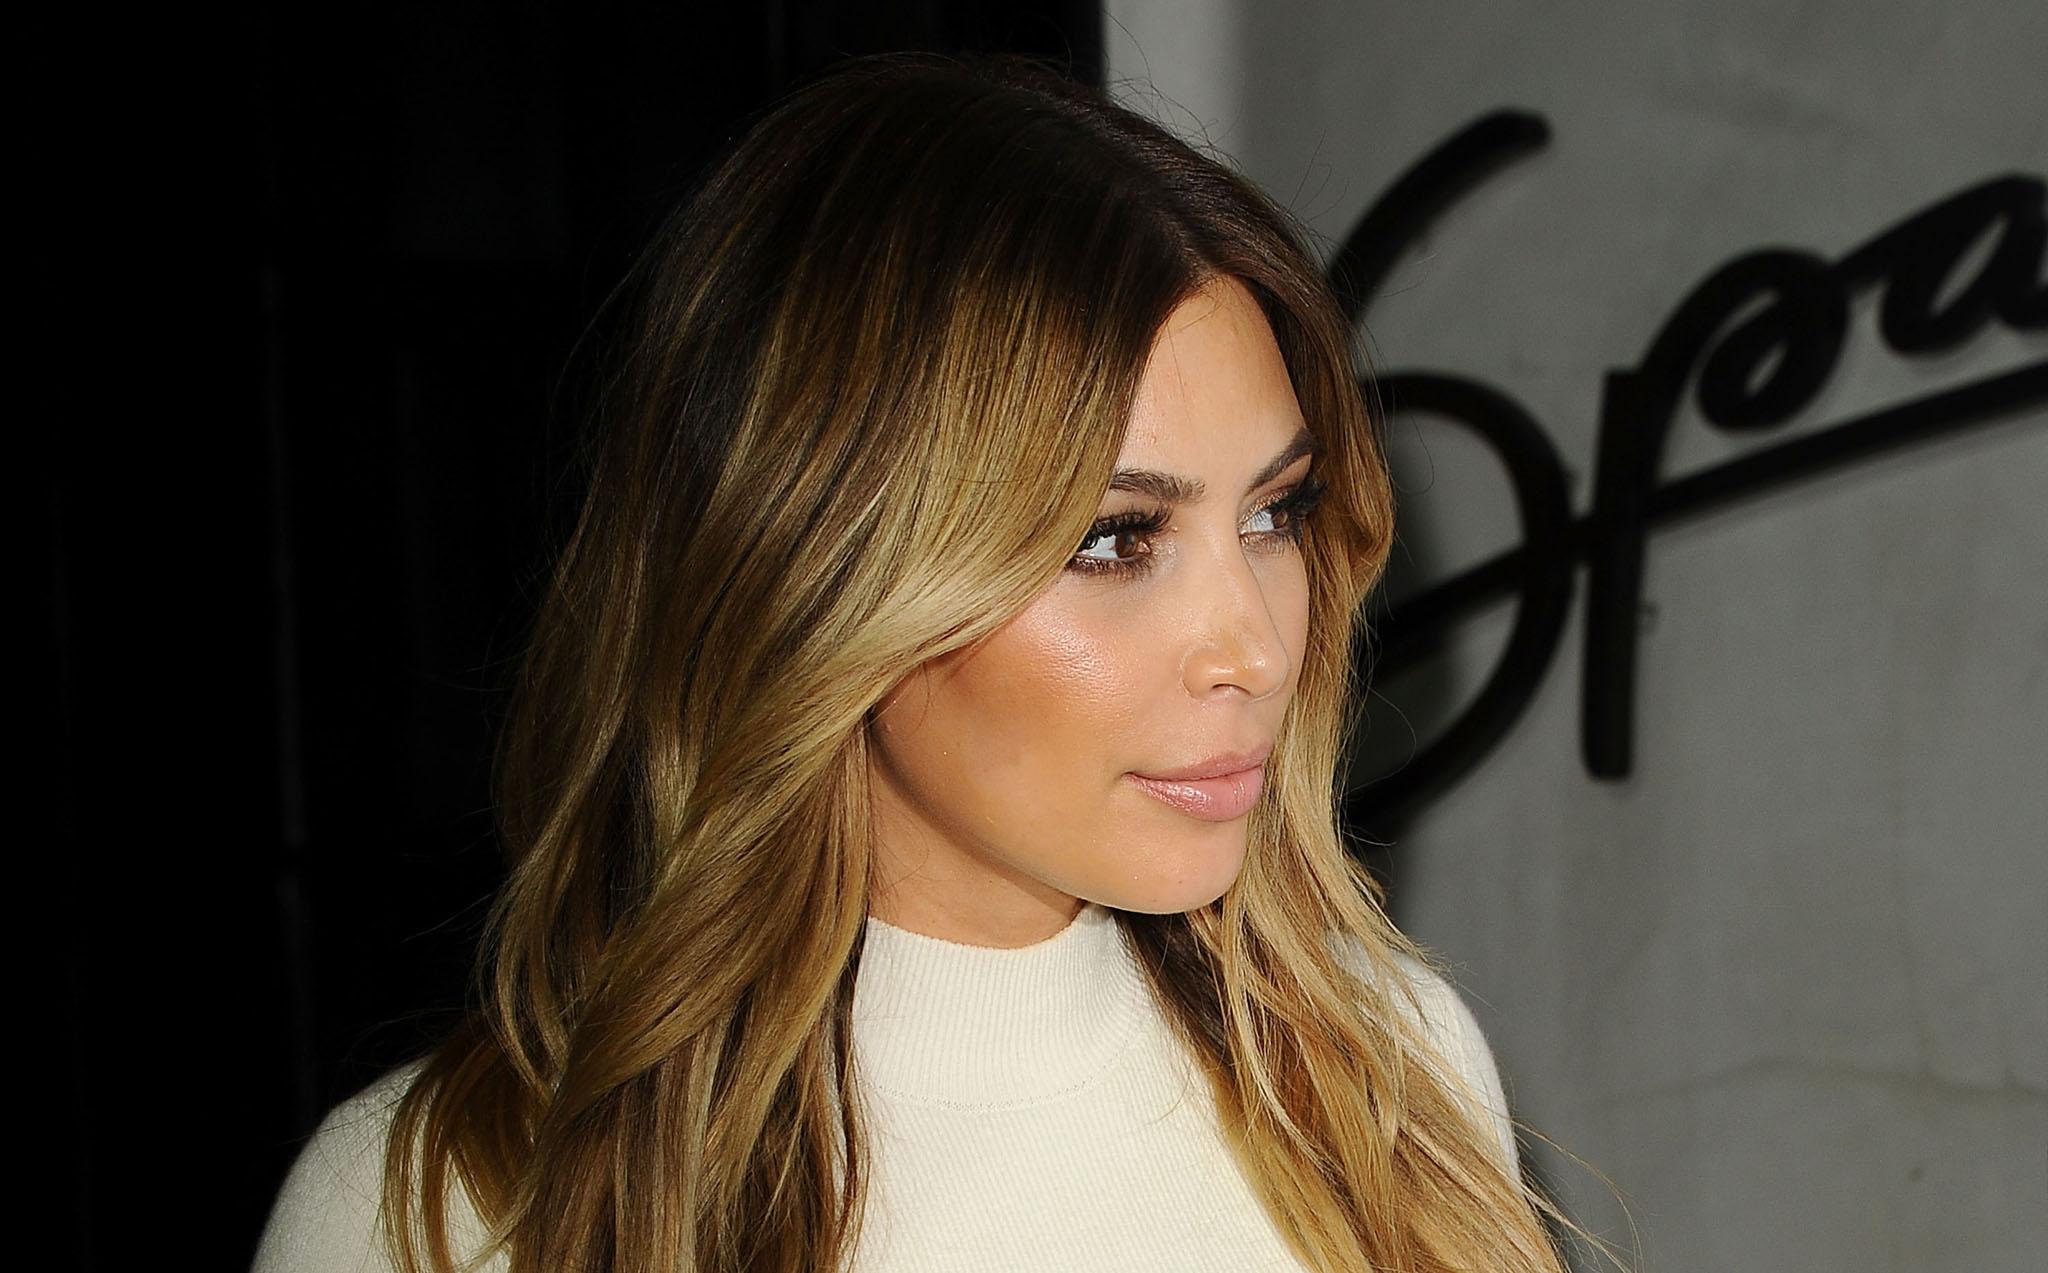 The "Vampire" cosmetic procedures have been championed by Kim Kardashian